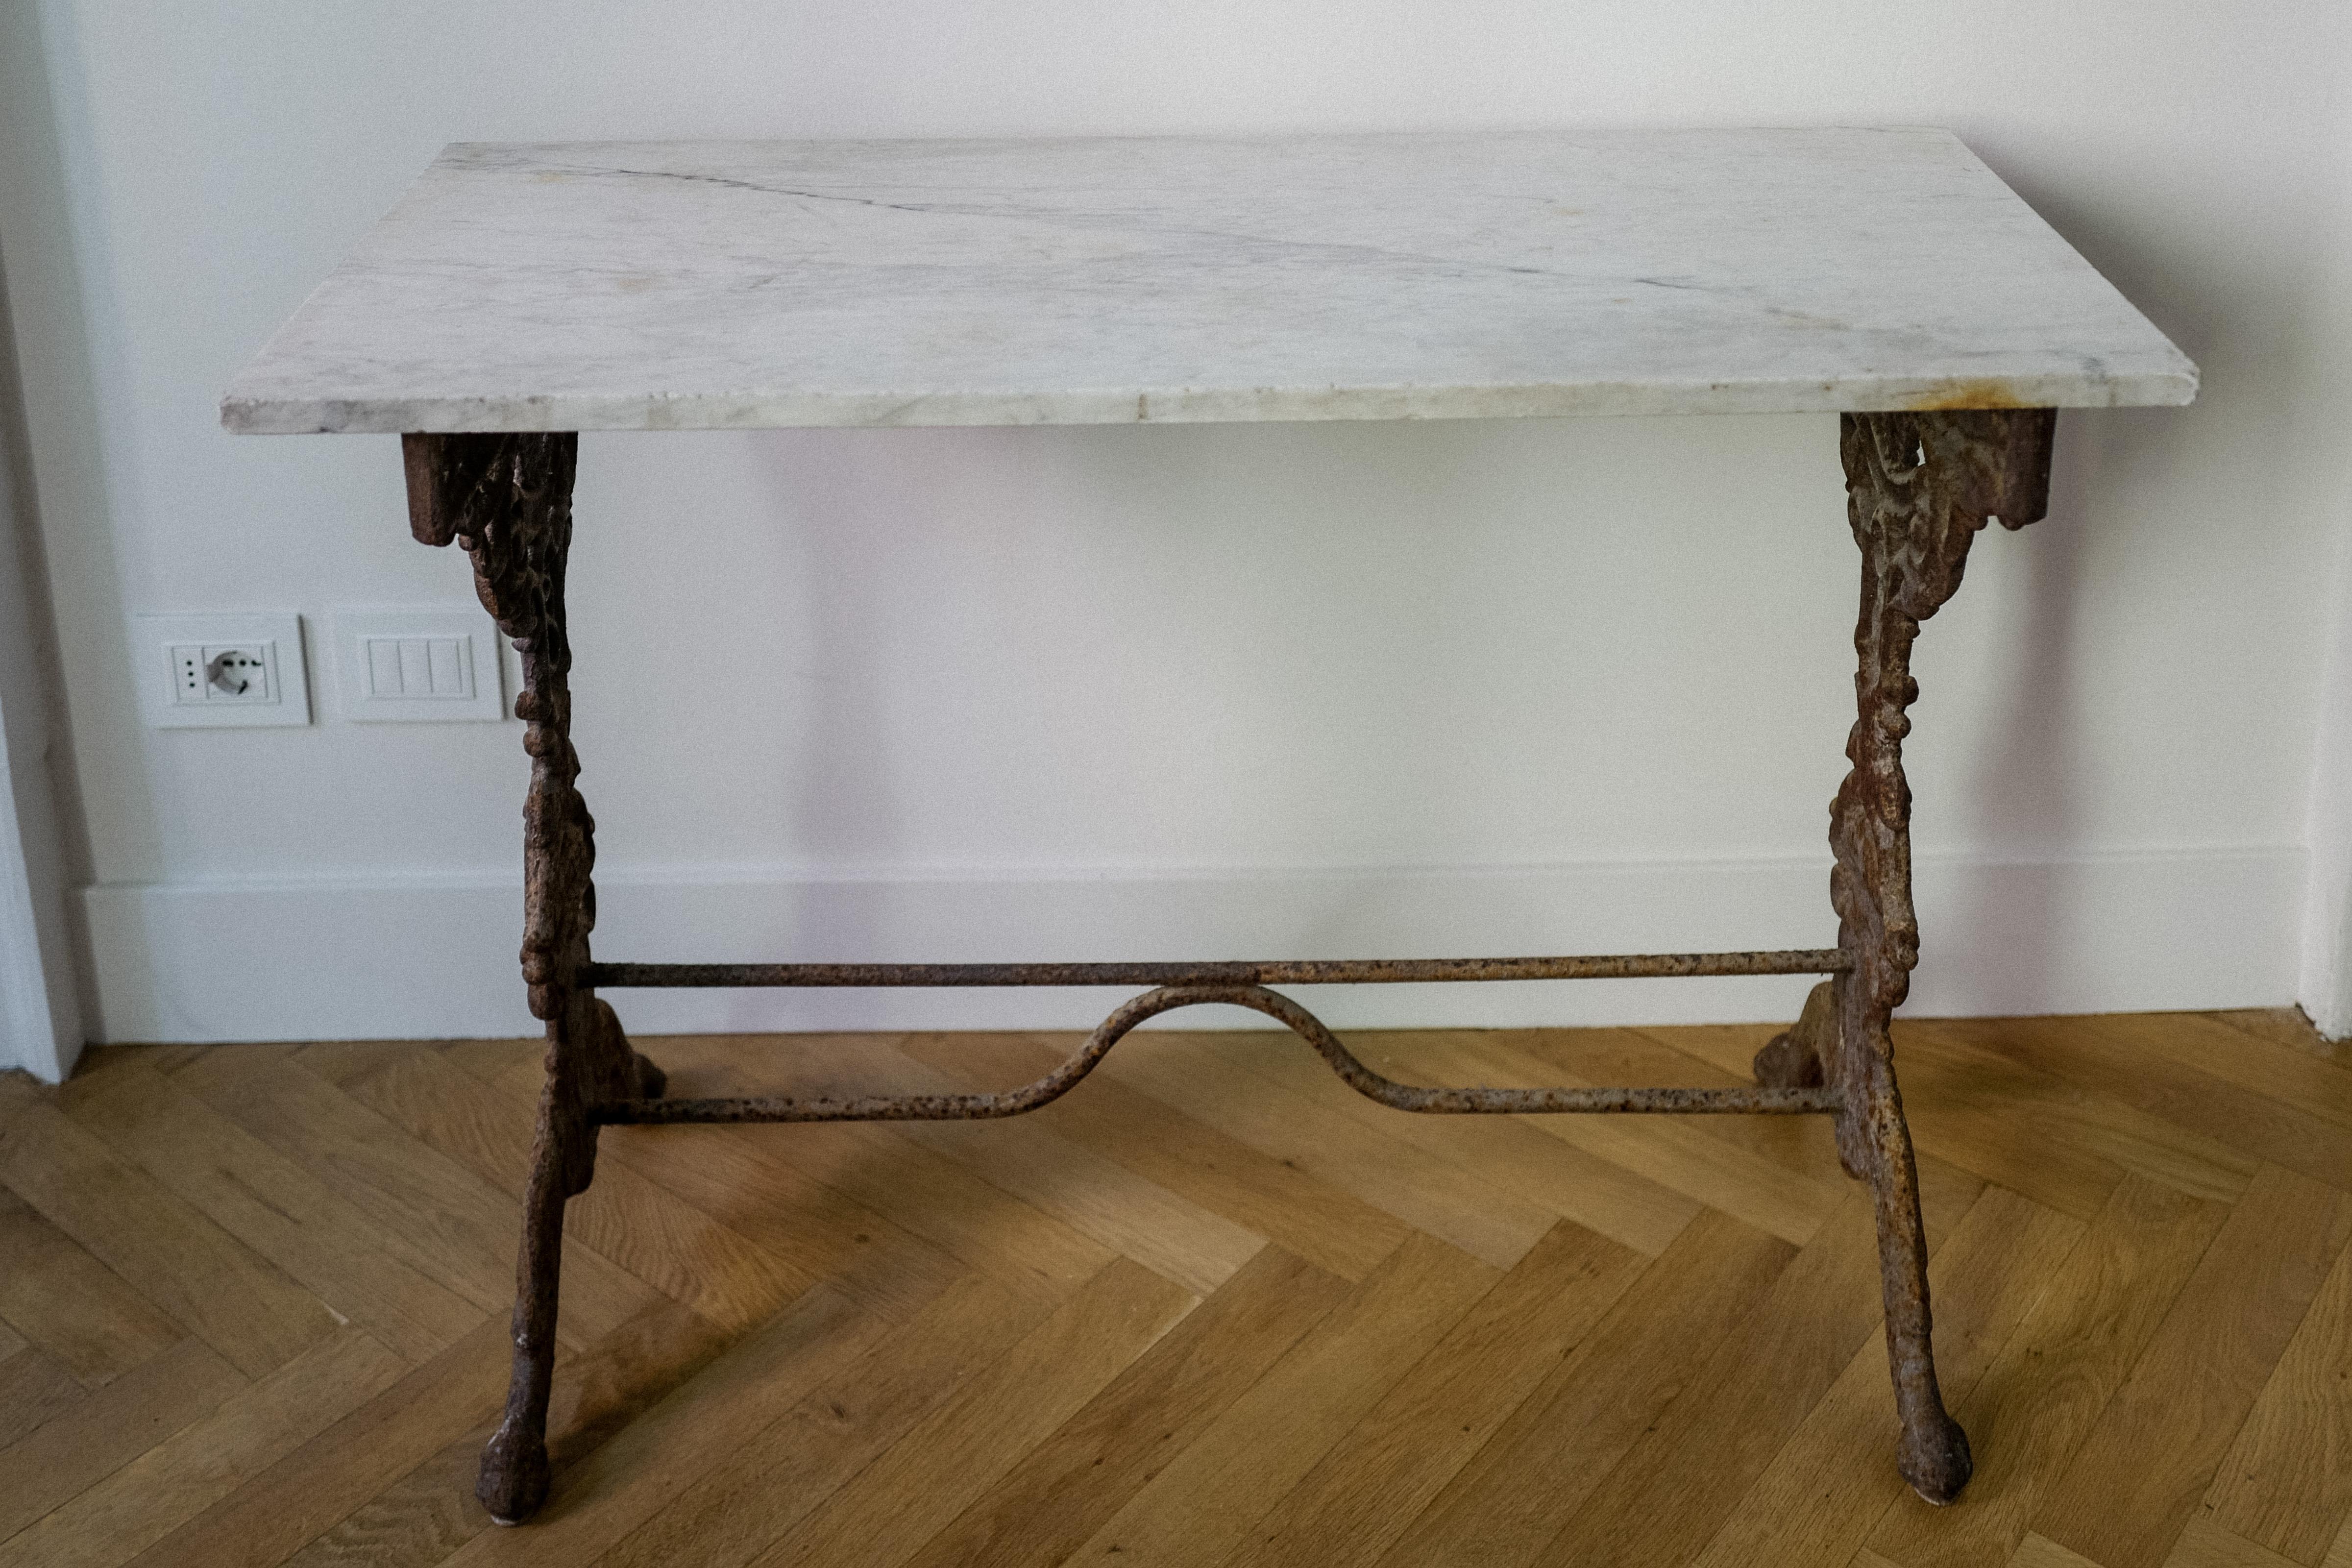 Italian cararra marble and iron console 19th Century from Lucca, Italy. Iron has some rust and bottom of marble does as well due to being outside but overall it is just gorgeous. Could be used inside or outside as a console or as a serving table. 